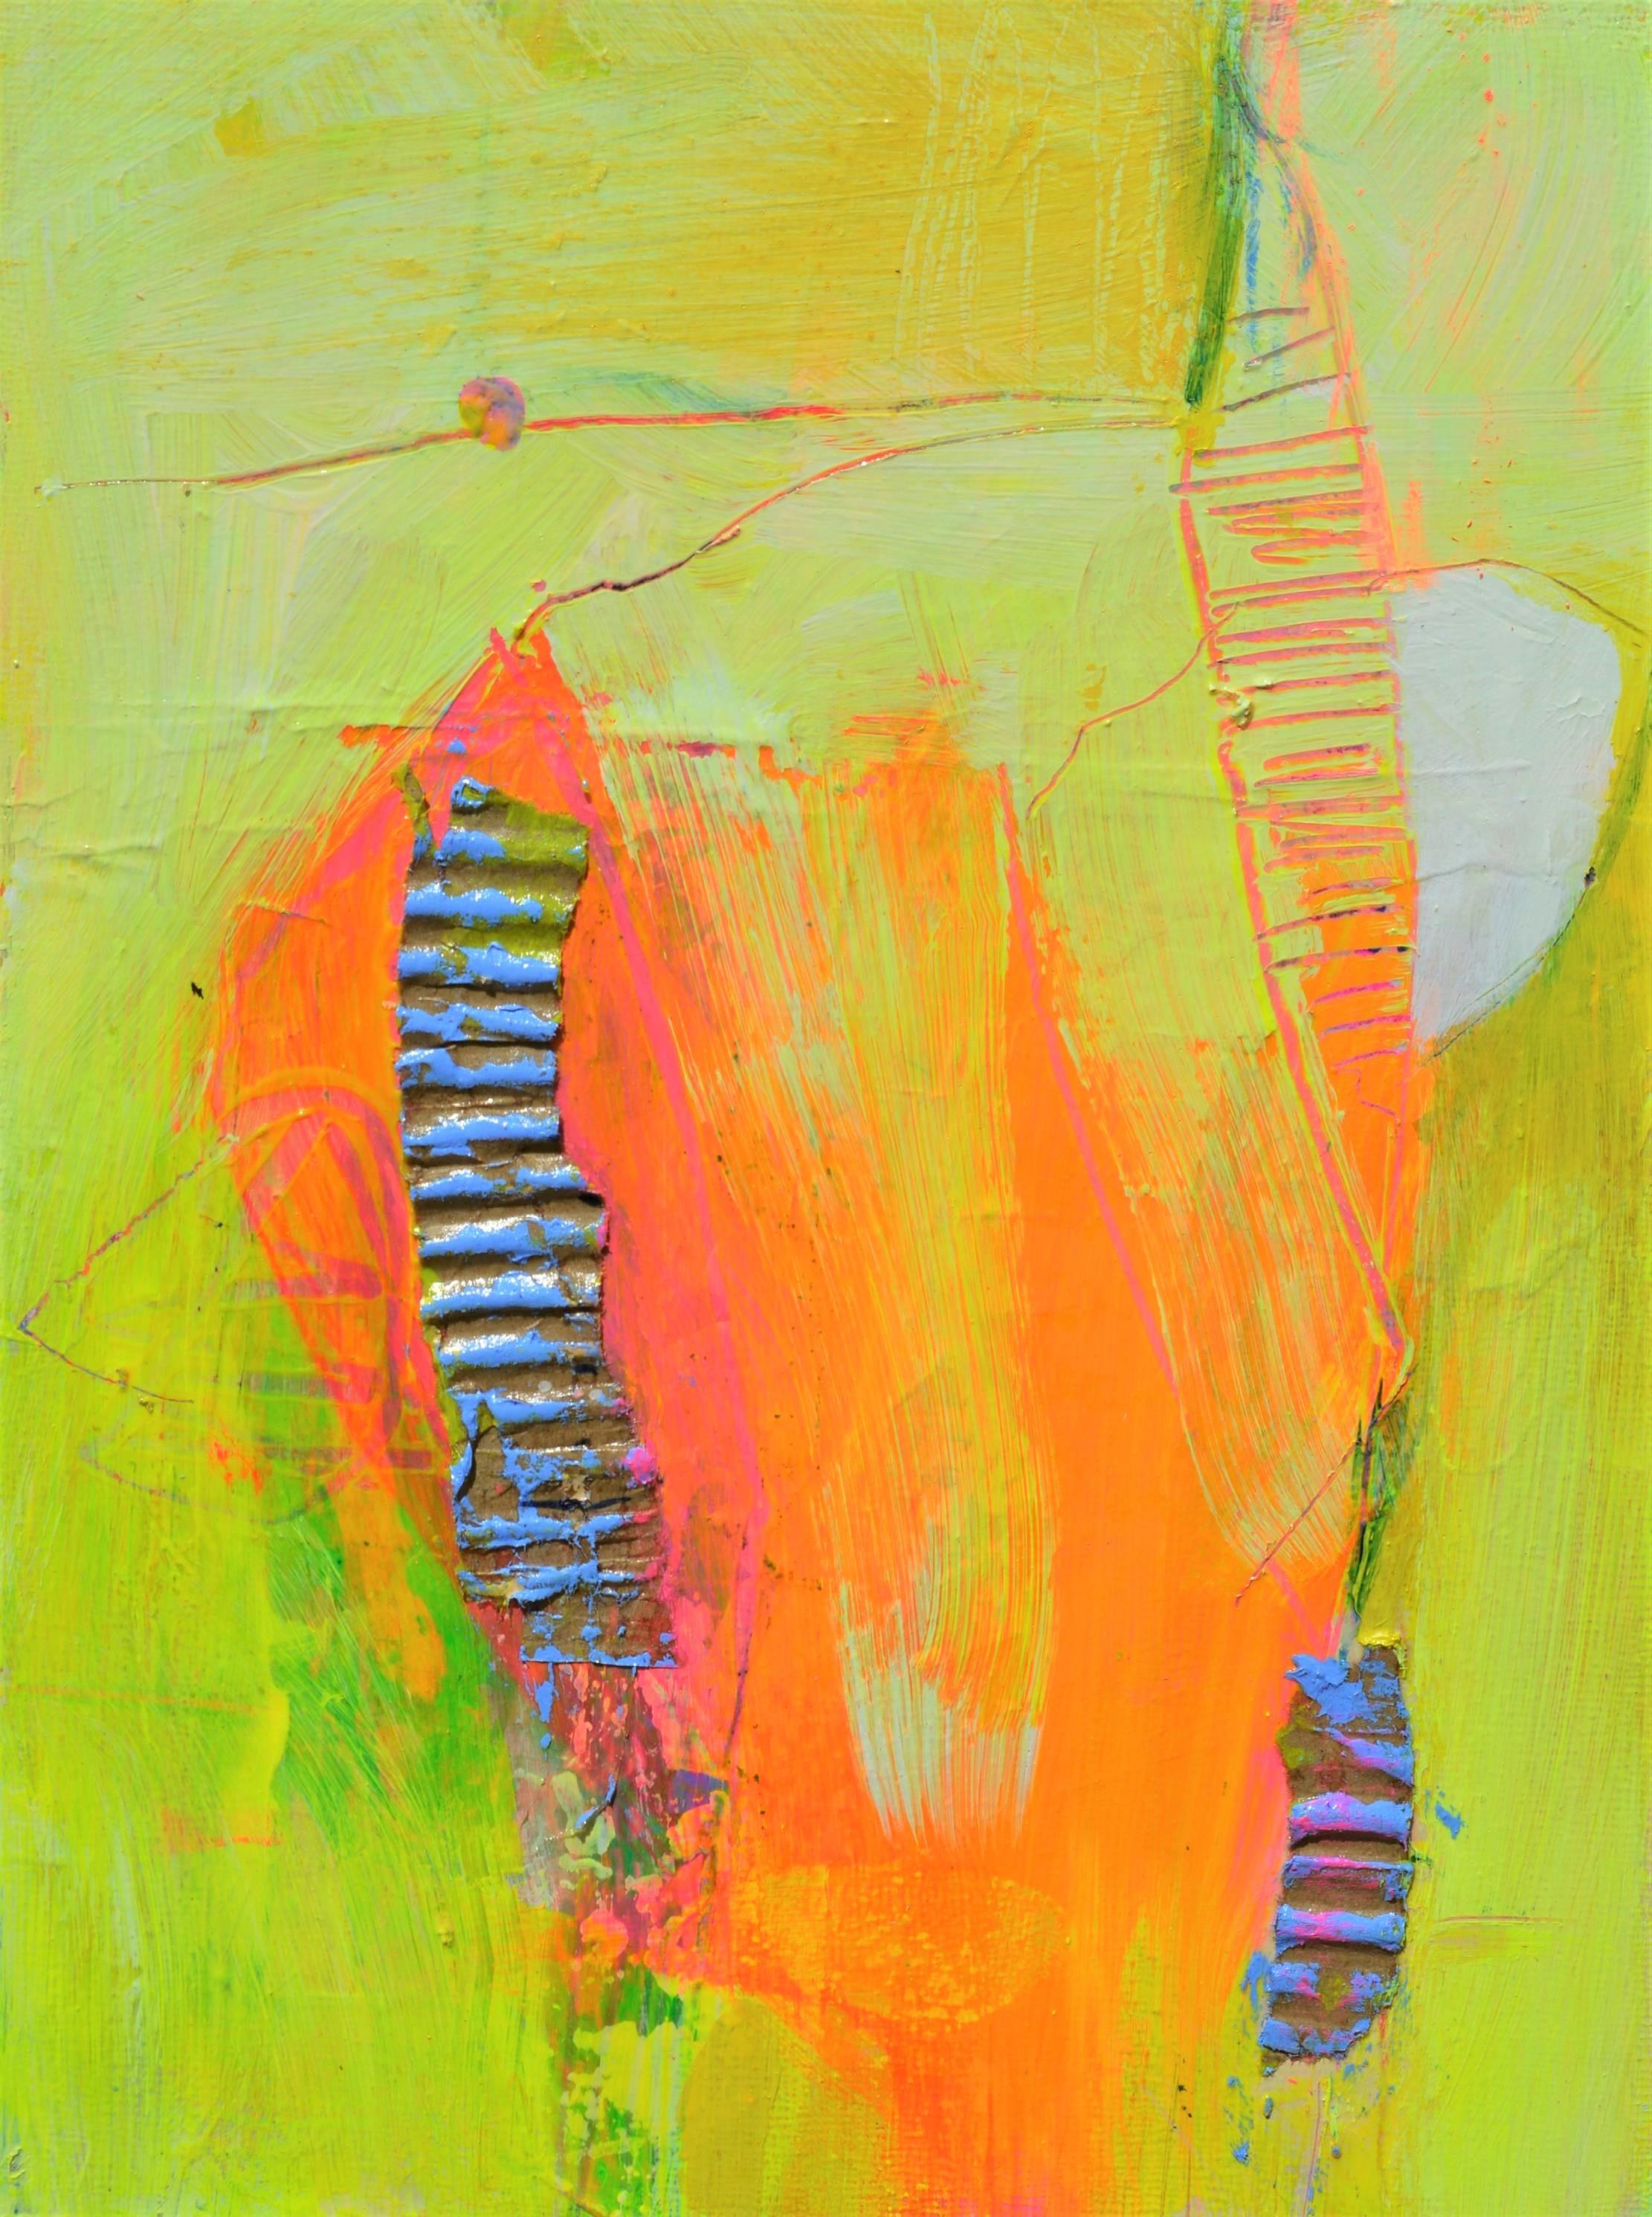 Ethereal Abstraction 27, Abstract Painting - Mixed Media Art by Patrick O'Boyle